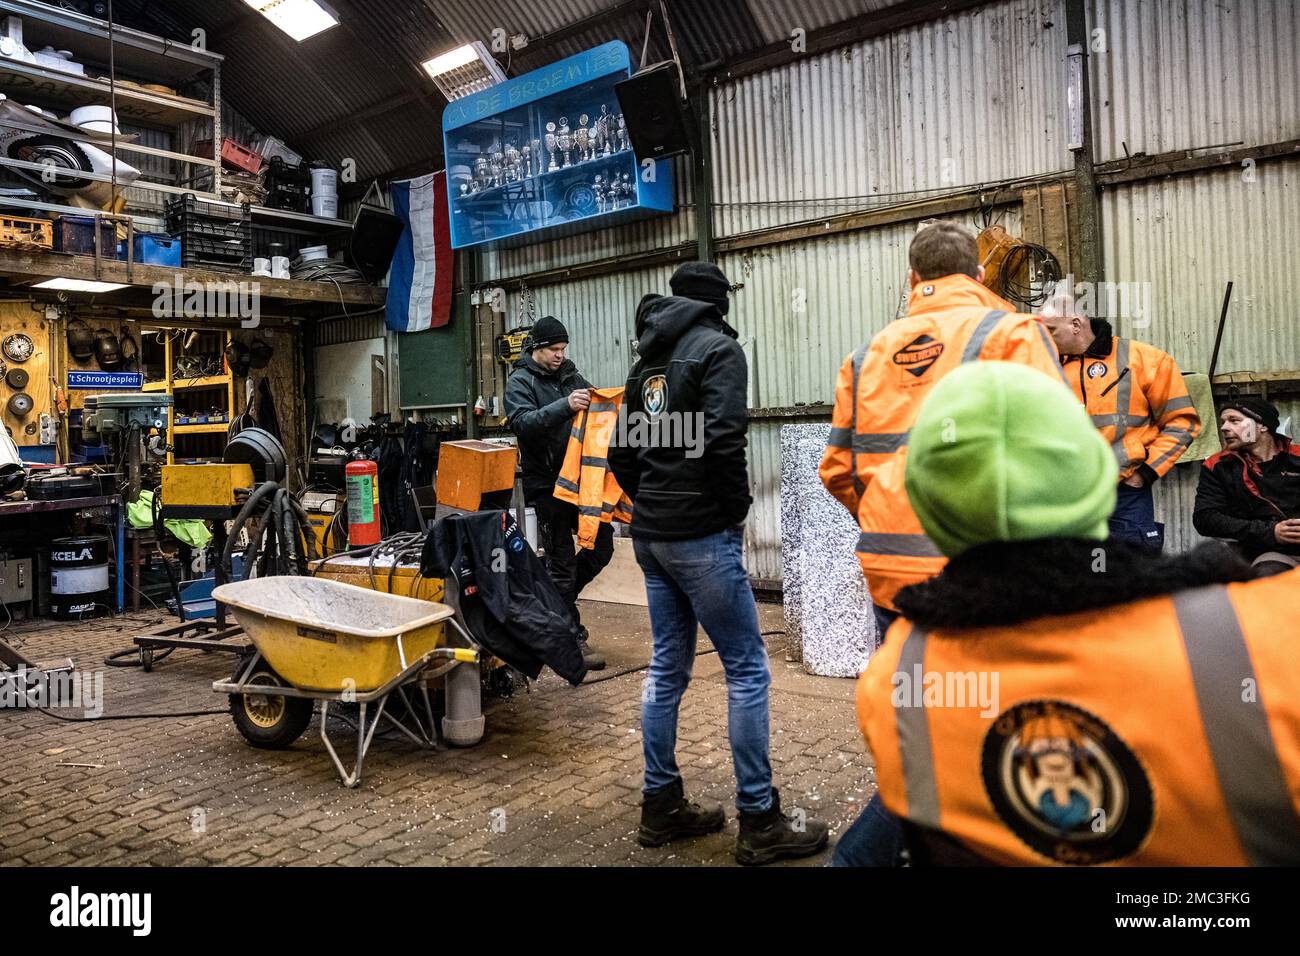 OIRSCHOT - Members of a carnival association gather to practice assembling a float. Carnival is celebrated in the south of the country in February. ANP ROB ENGELAAR netherlands out - belgium out Credit: ANP/Alamy Live News Stock Photo